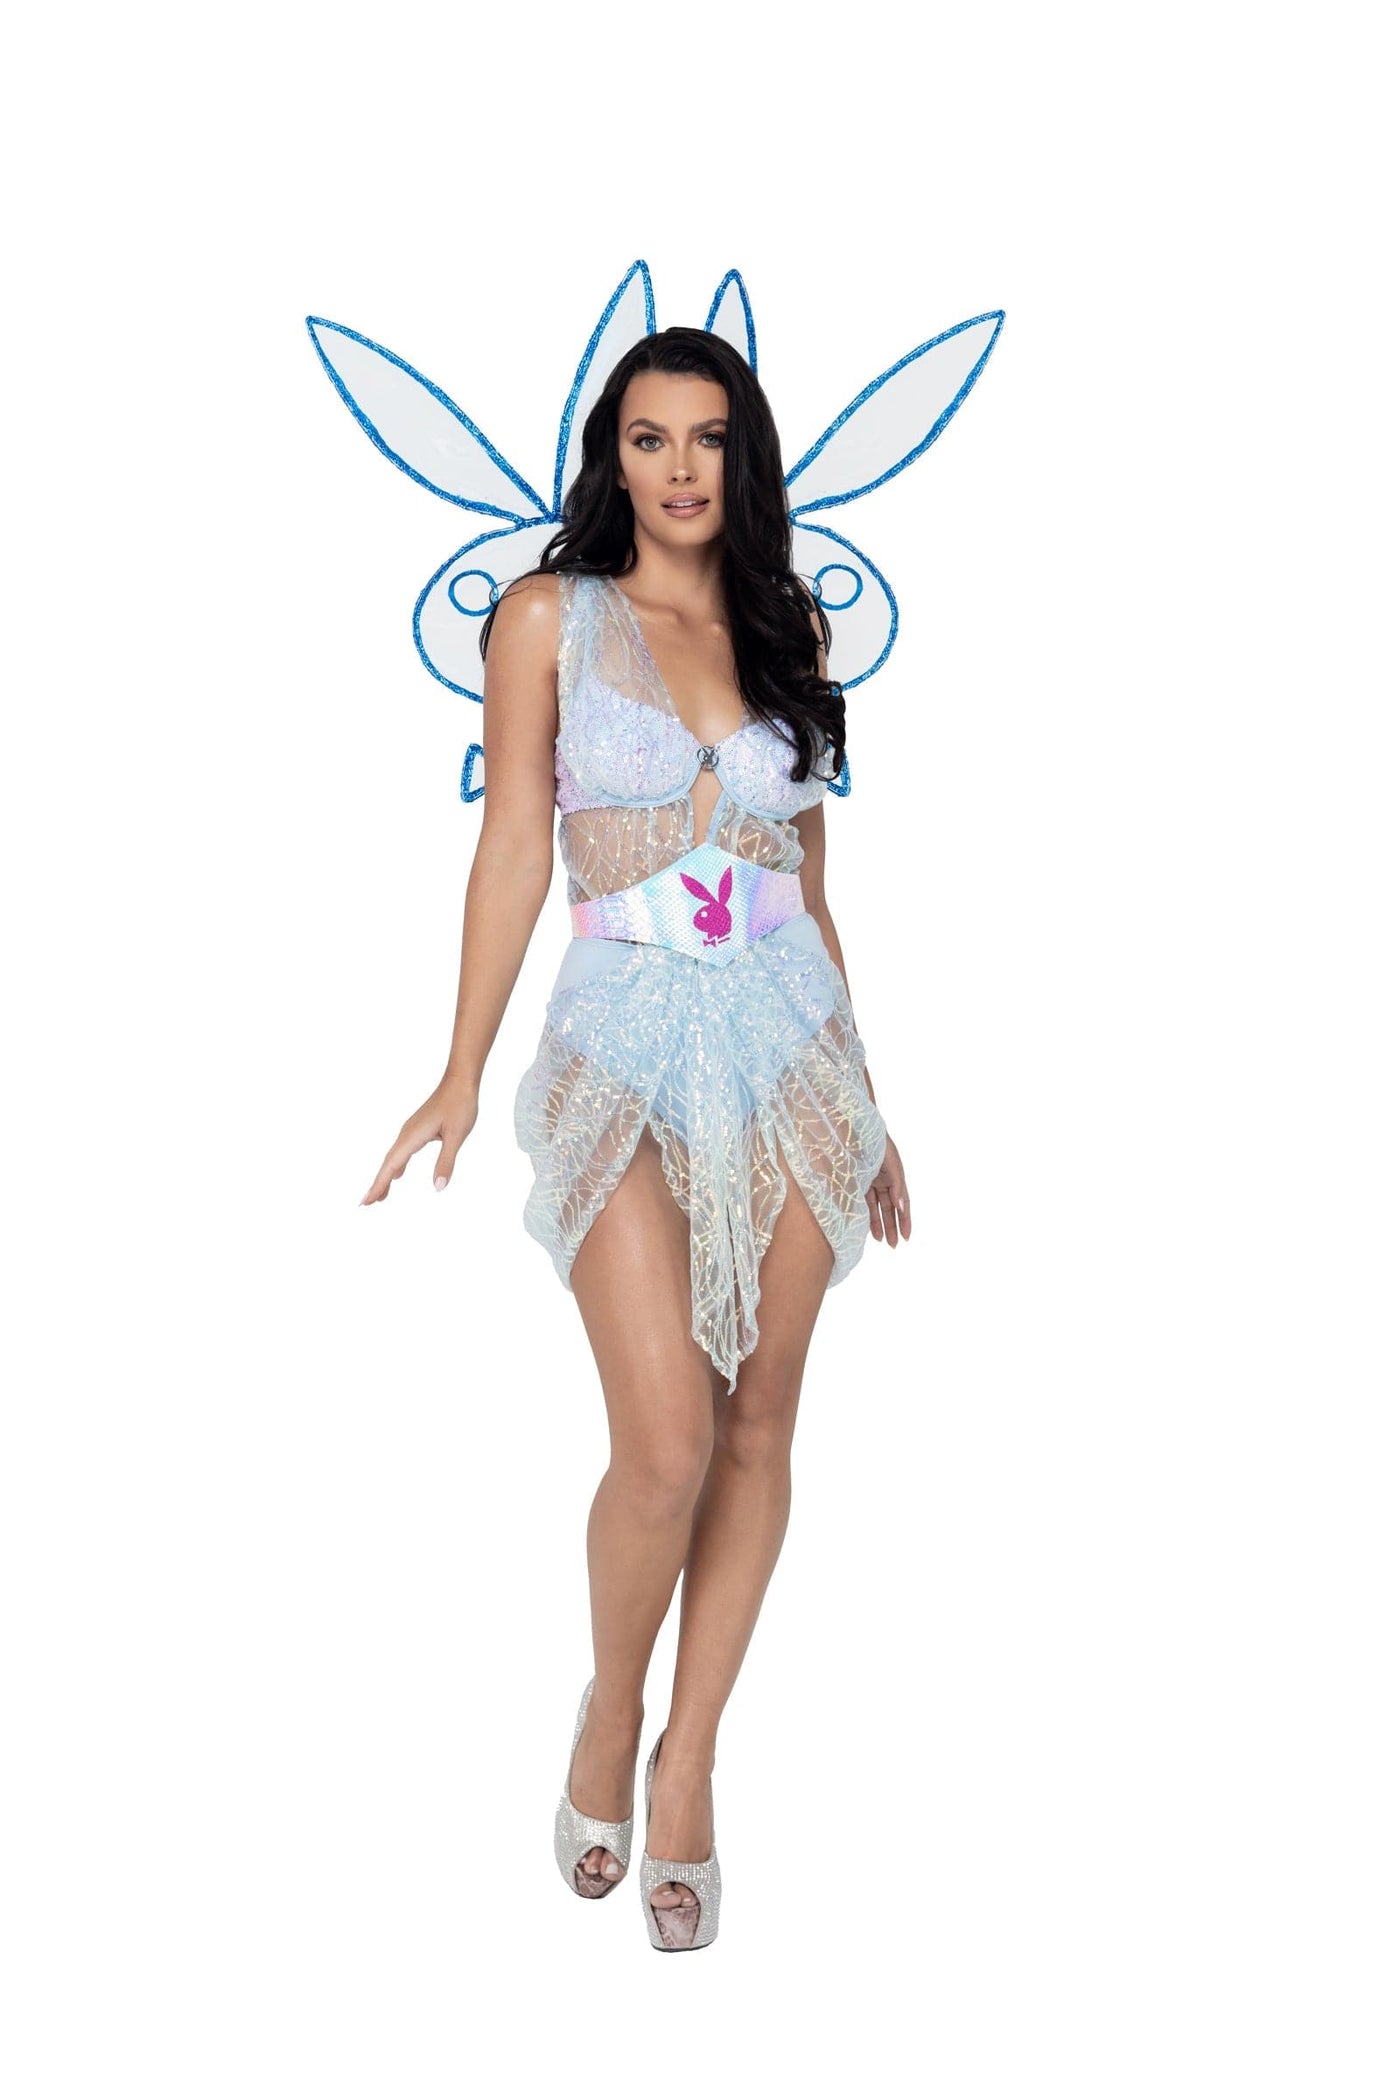 3pc. Official Playboy Bunny Mystical Fairy Women's Costume - For Love of Lingerie